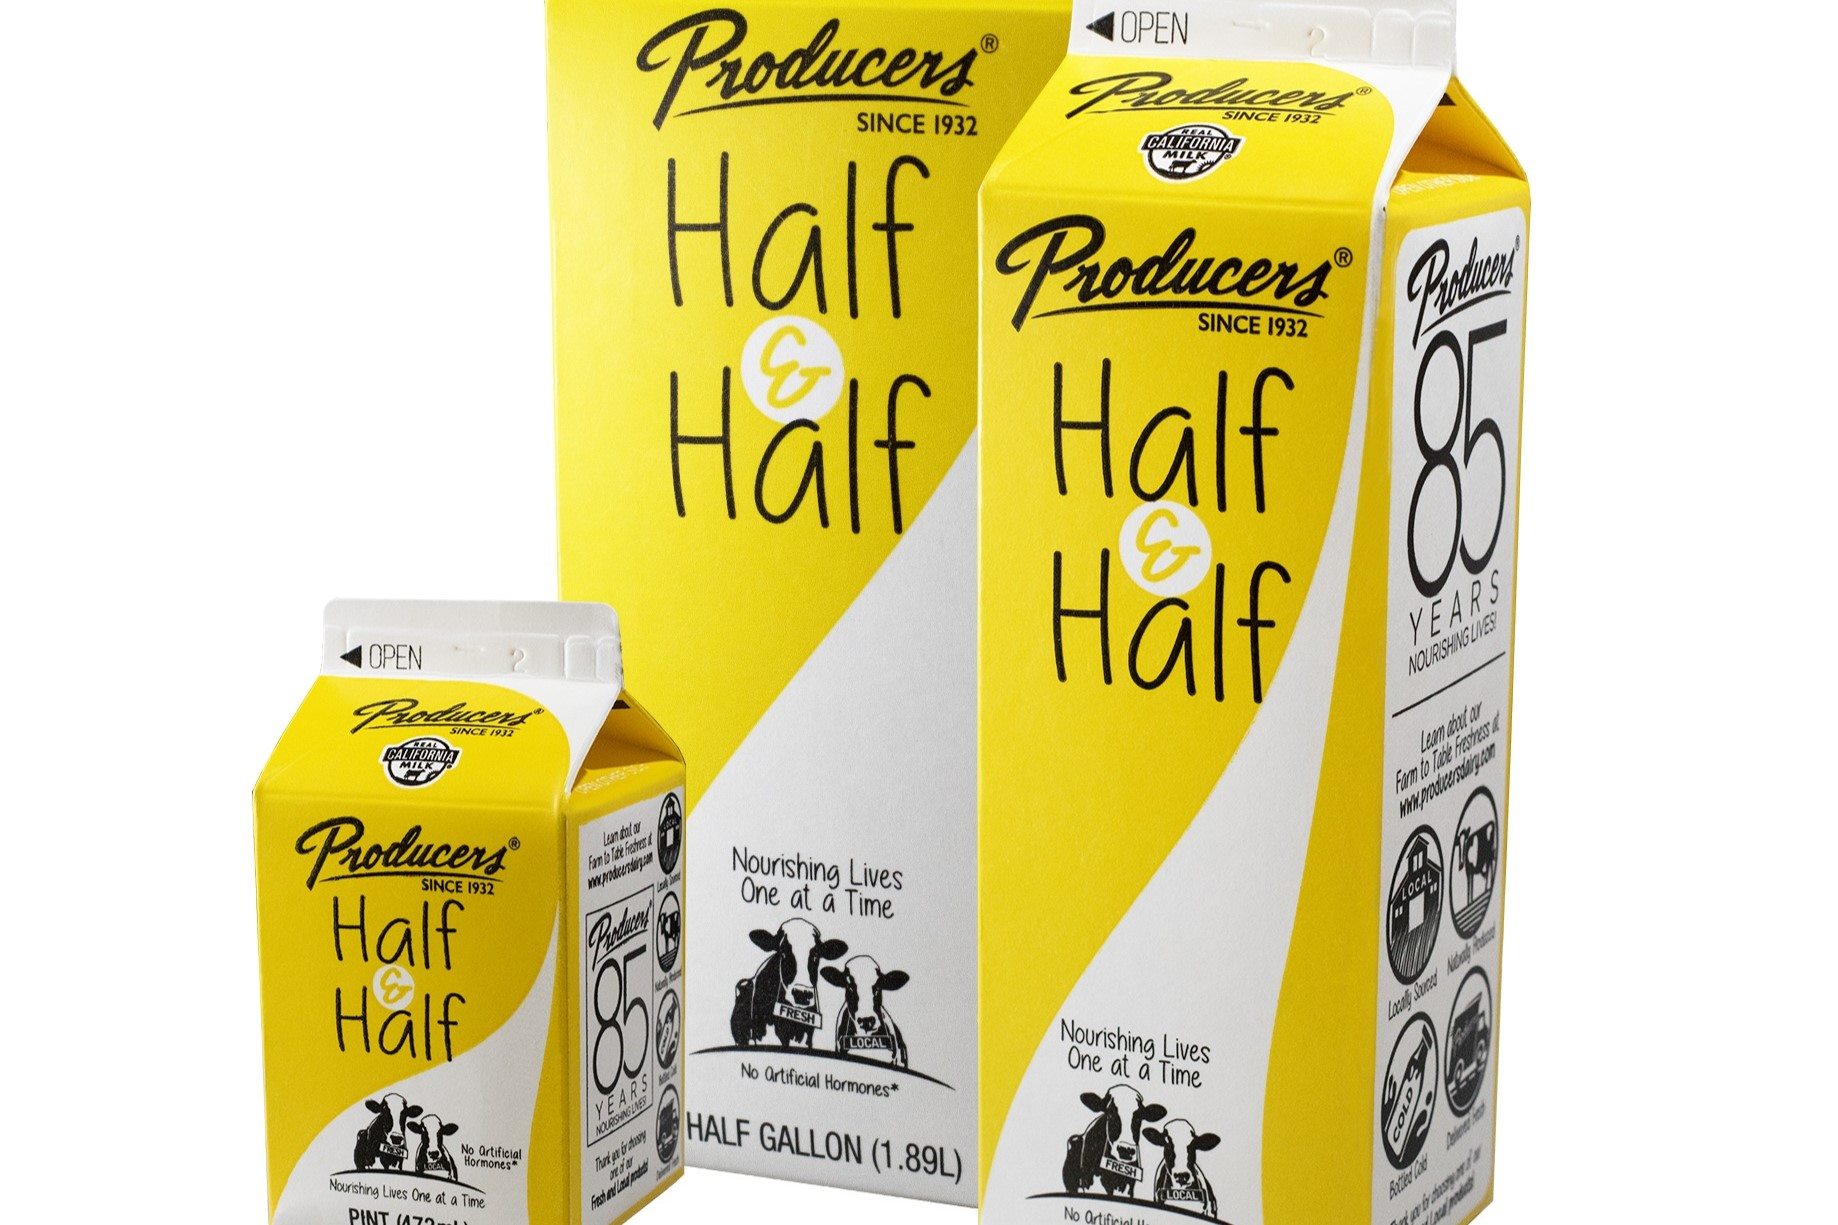 You Won’t Believe What Happened When I Froze A Carton Of Half And Half!